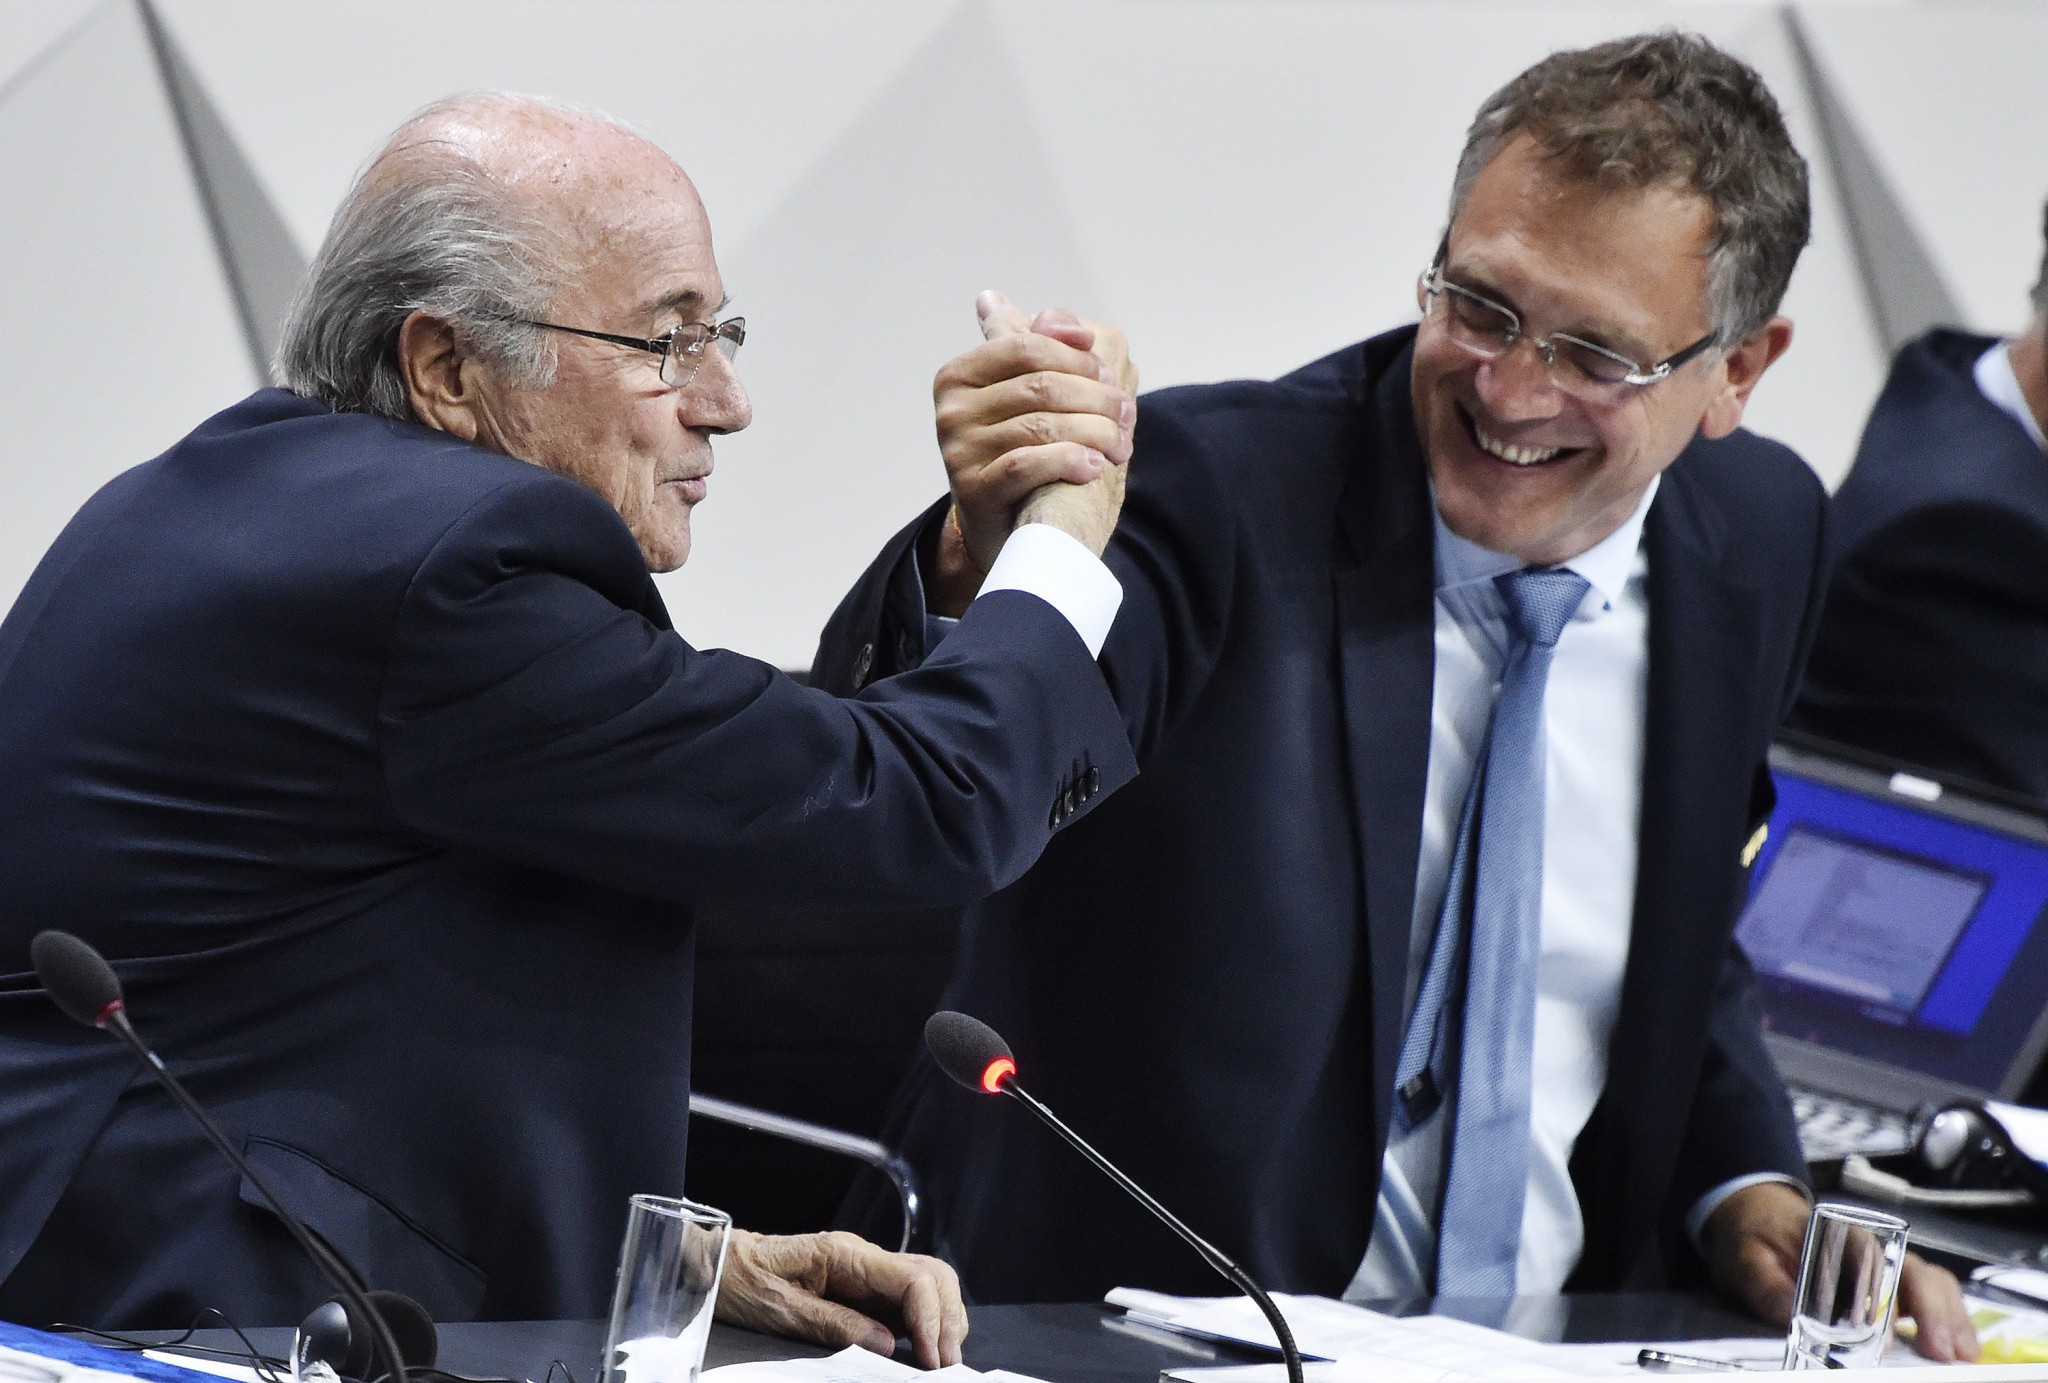 Enjoying the better times that's former FIFA President Sepp Blatter with then general secretary Jerome Valcke back in 2015 ©Getty Images